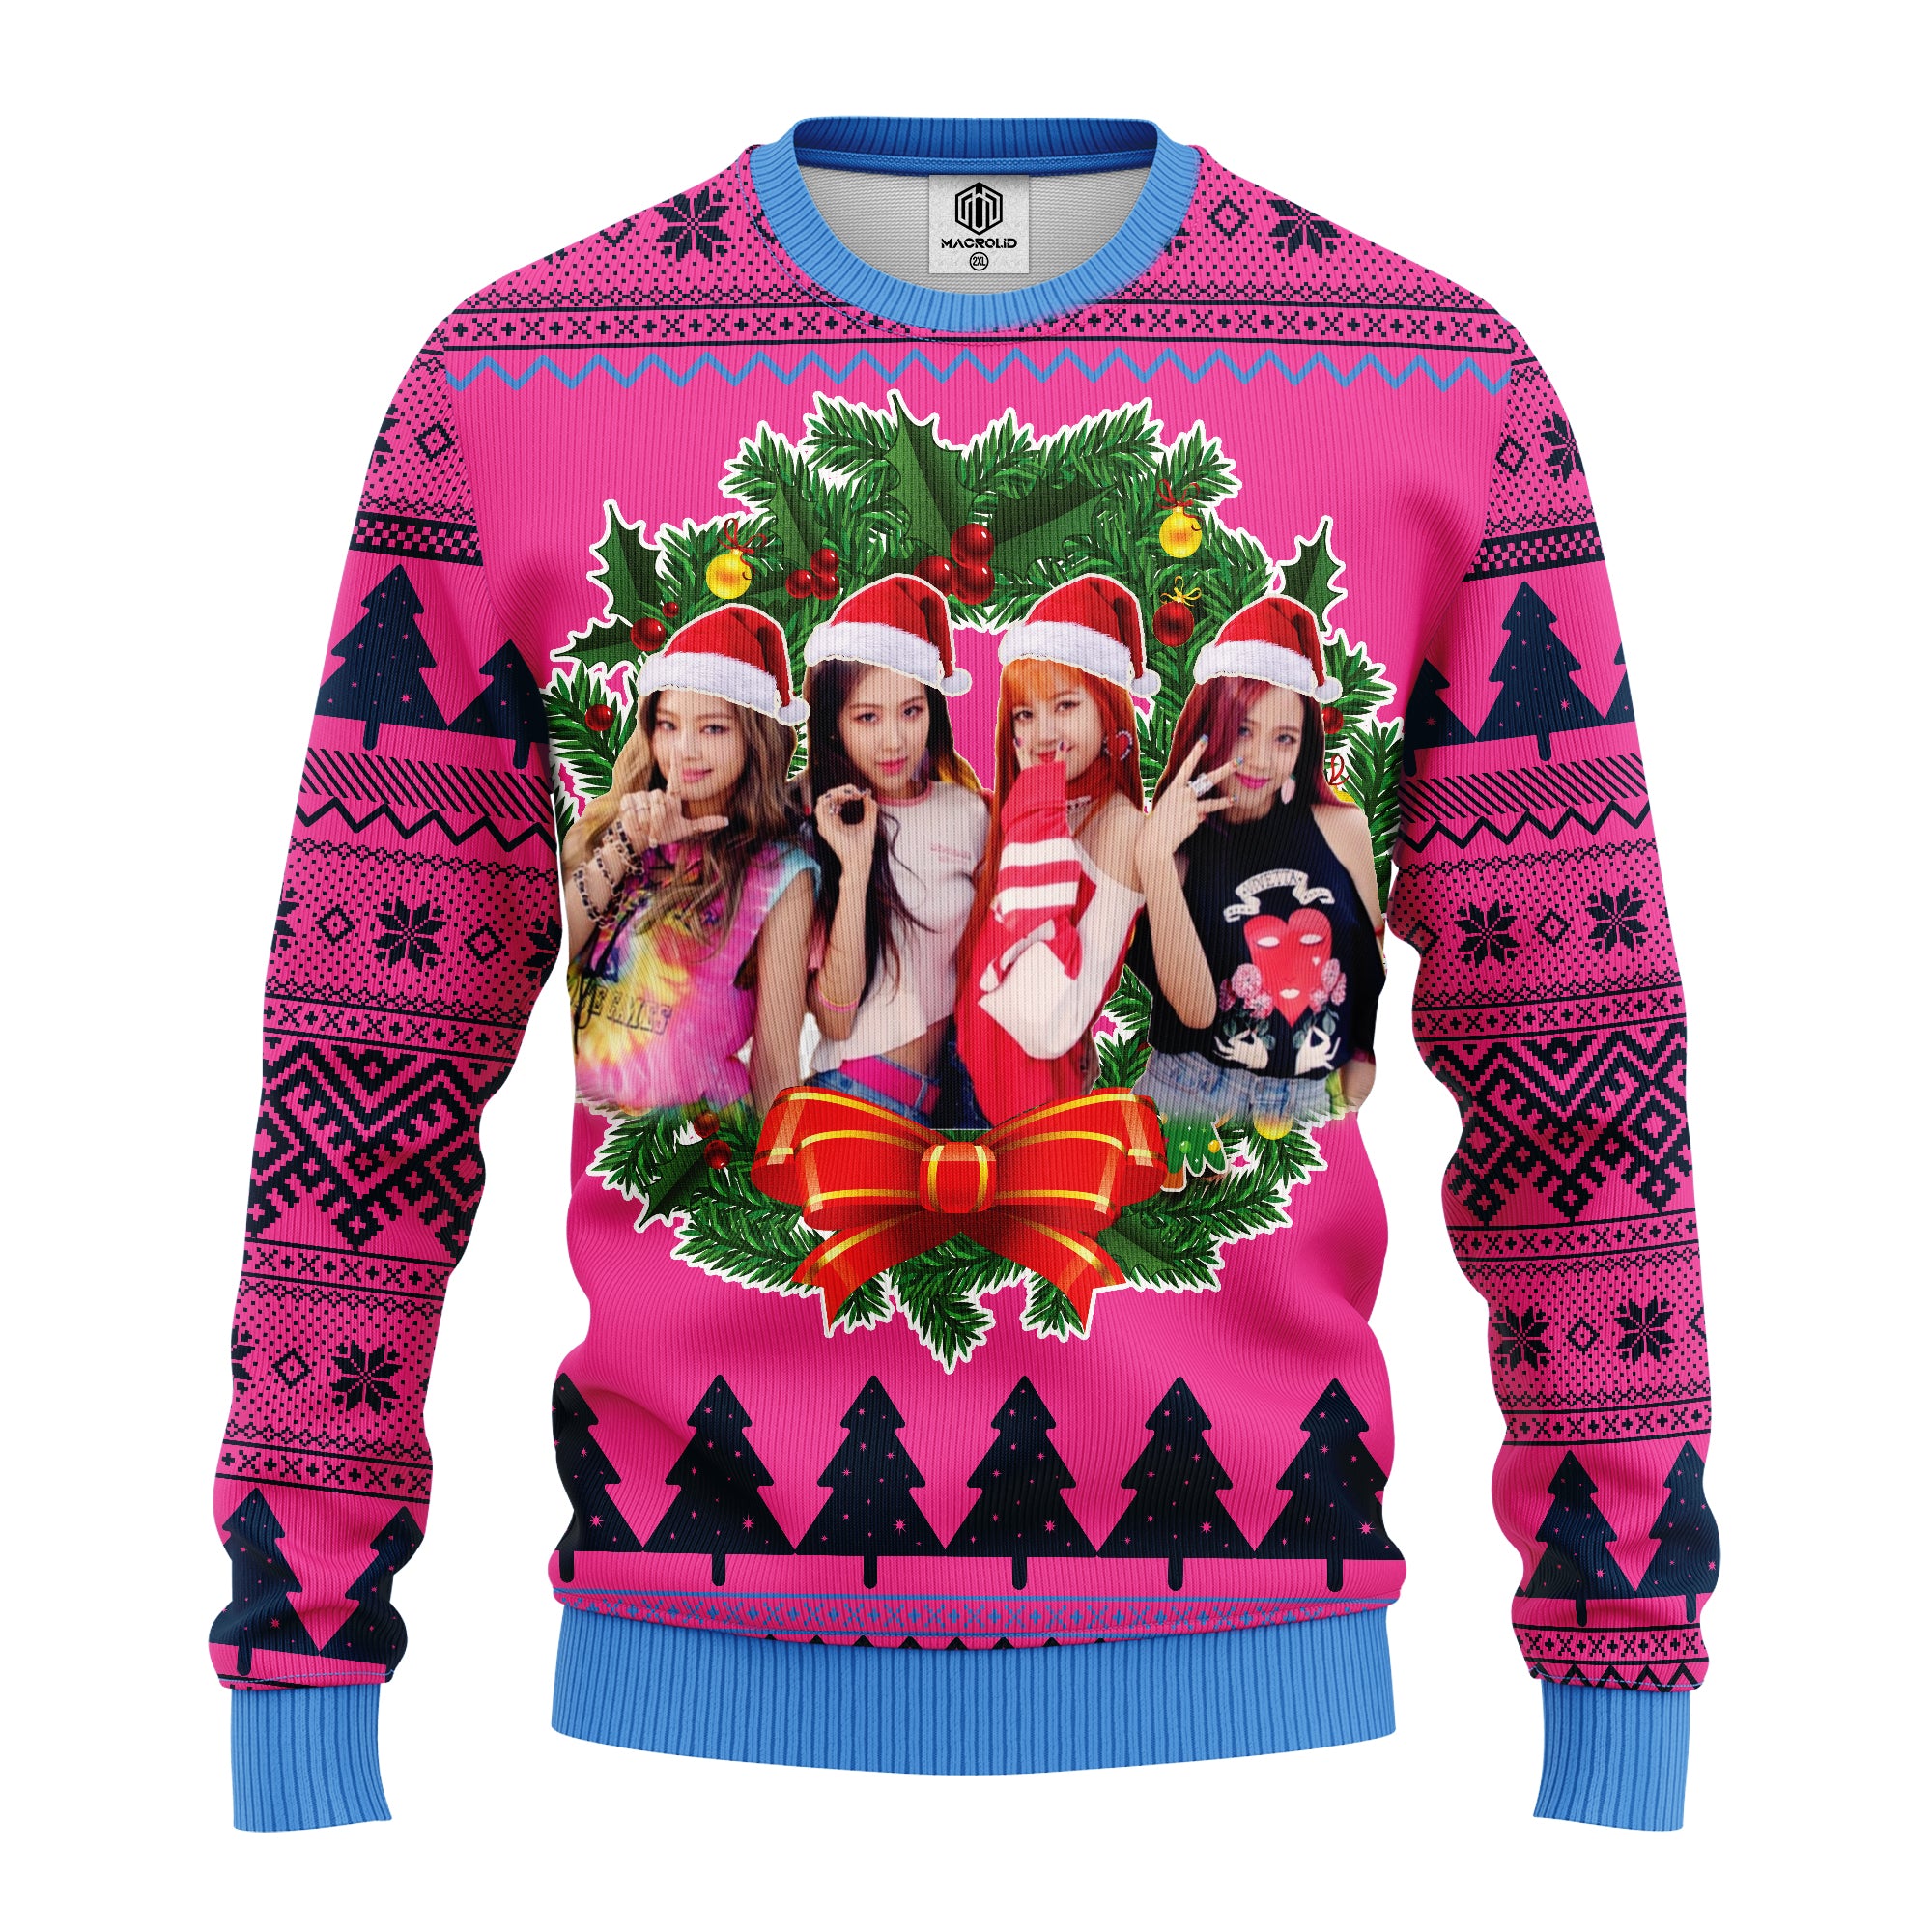 Blackpink New Ugly Christmas Sweater 3 Amazing Gift Idea Thanksgiving Gift